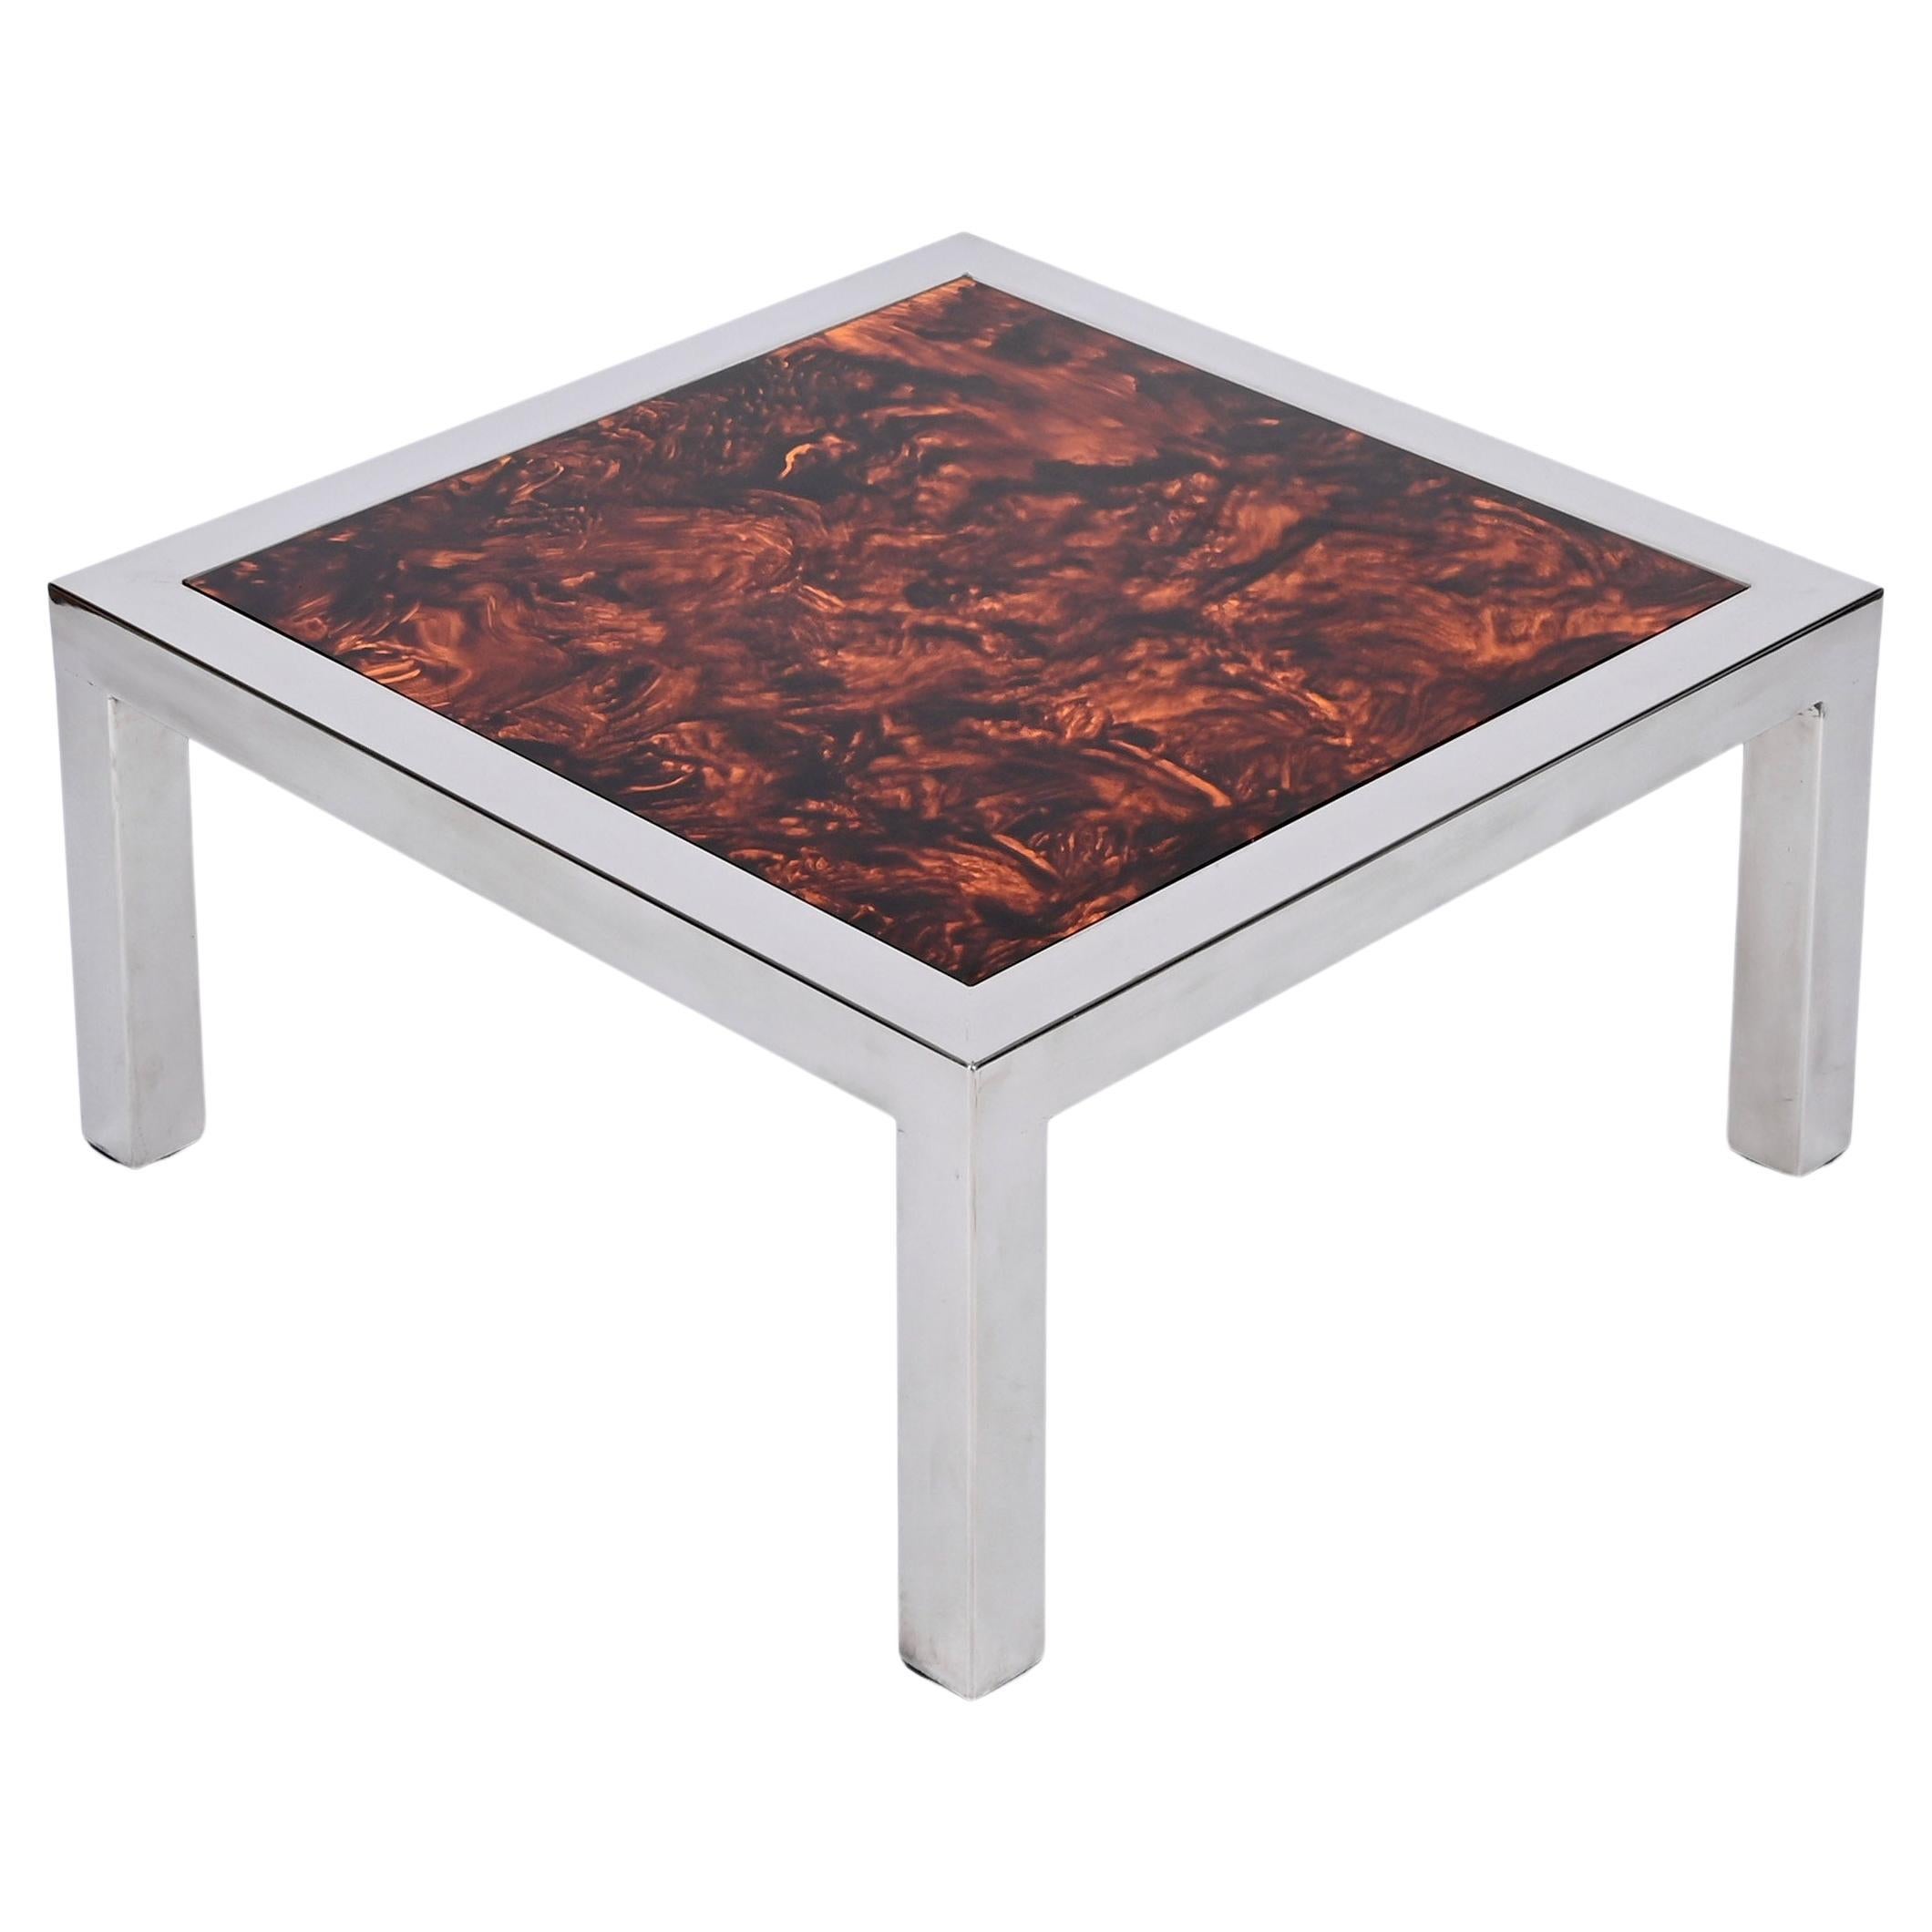 Chromed Steel and Tortoiseshell Effect Lucite Square Coffee Table, Italy 1970s For Sale